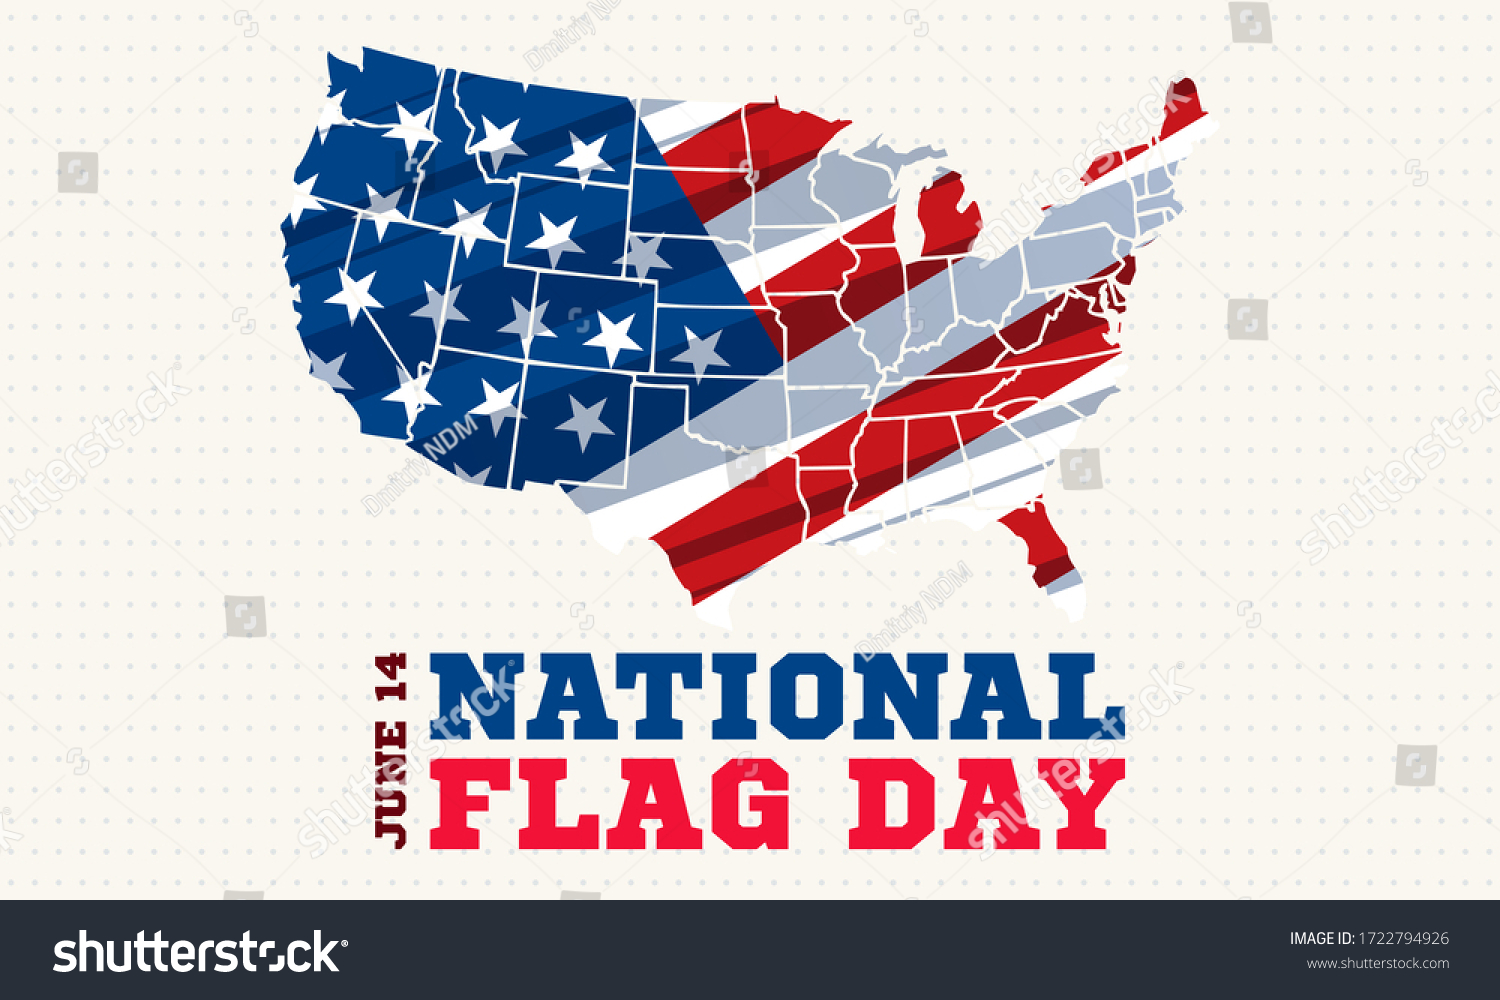 SVG of Flag Day June 14. It commemorates the adoption of the flag of the United States on June 14, 1777 by resolution of the Second Continental Congress. Poster, banner, background design. Vector eps 10 svg